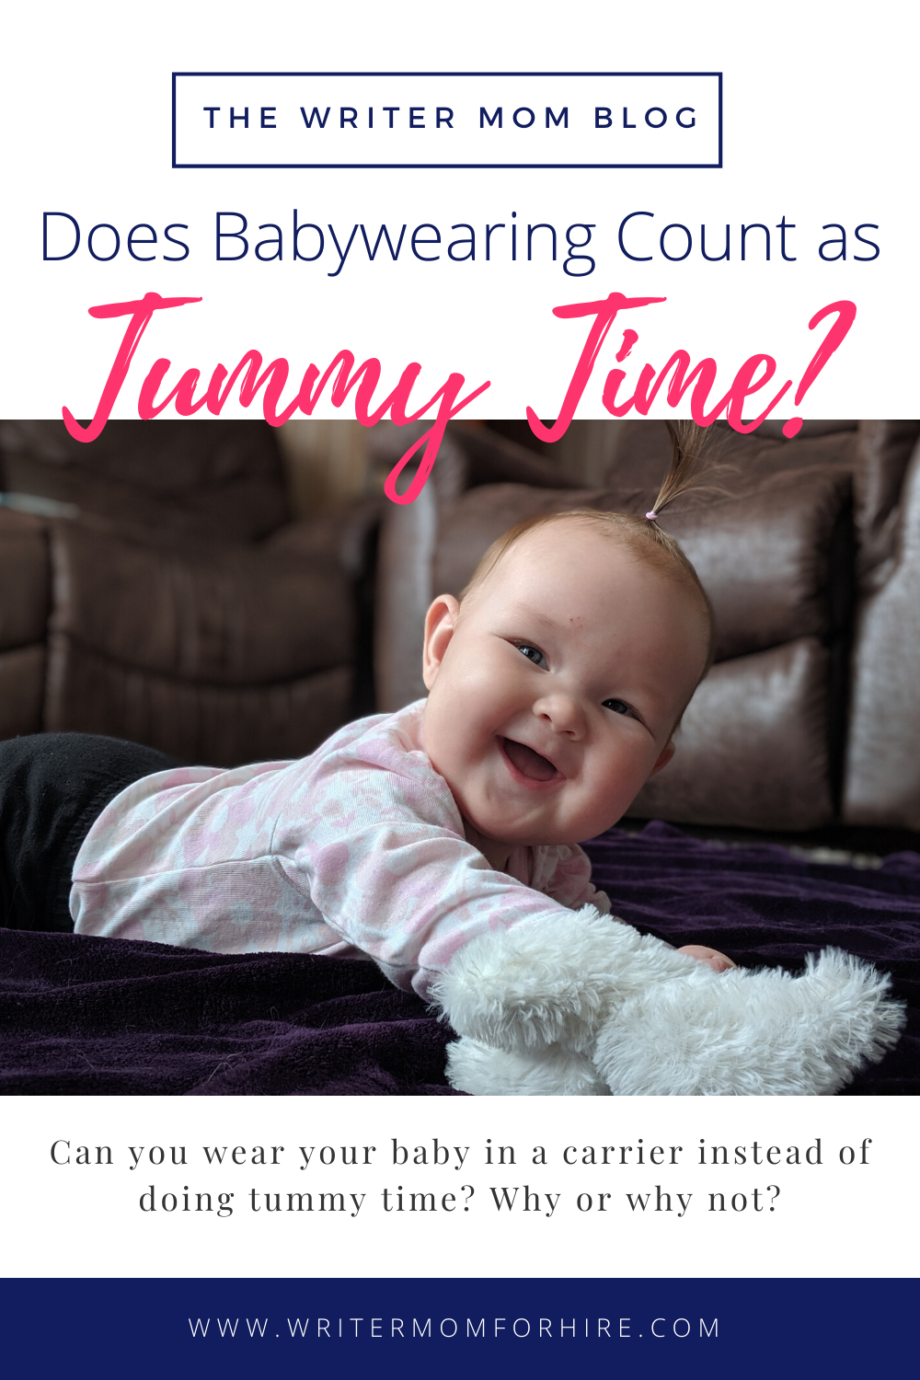 Tummy Time Alternatives Does Babywearing Count as Tummy Time? the